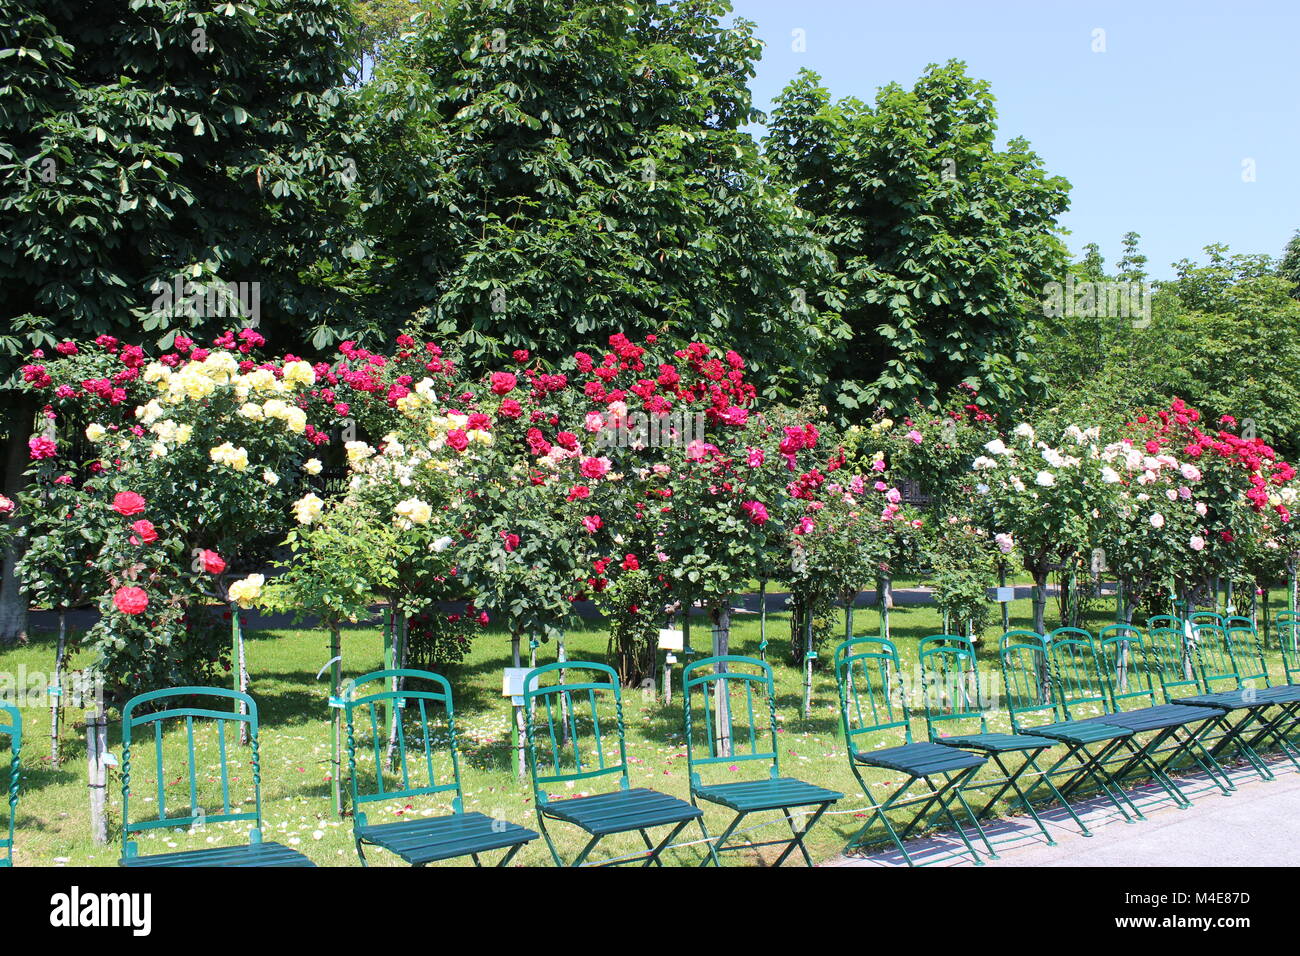 Empty row of seats in the rose garden Stock Photo